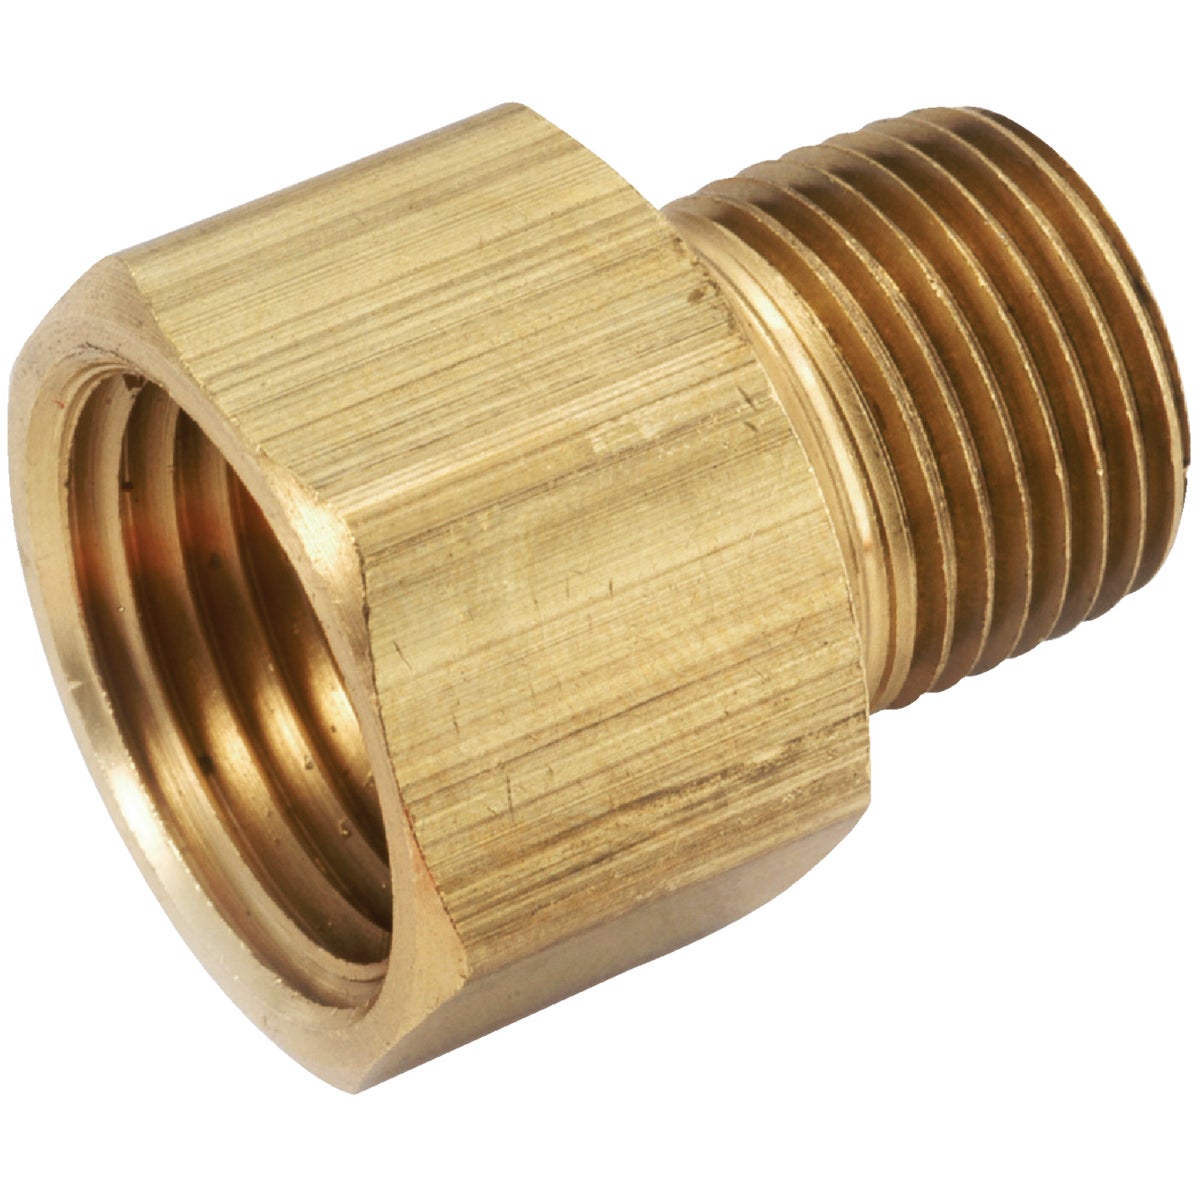 Anderson Metals 1/2 In. FPT x 1/2 In. MPT Brass Adapter